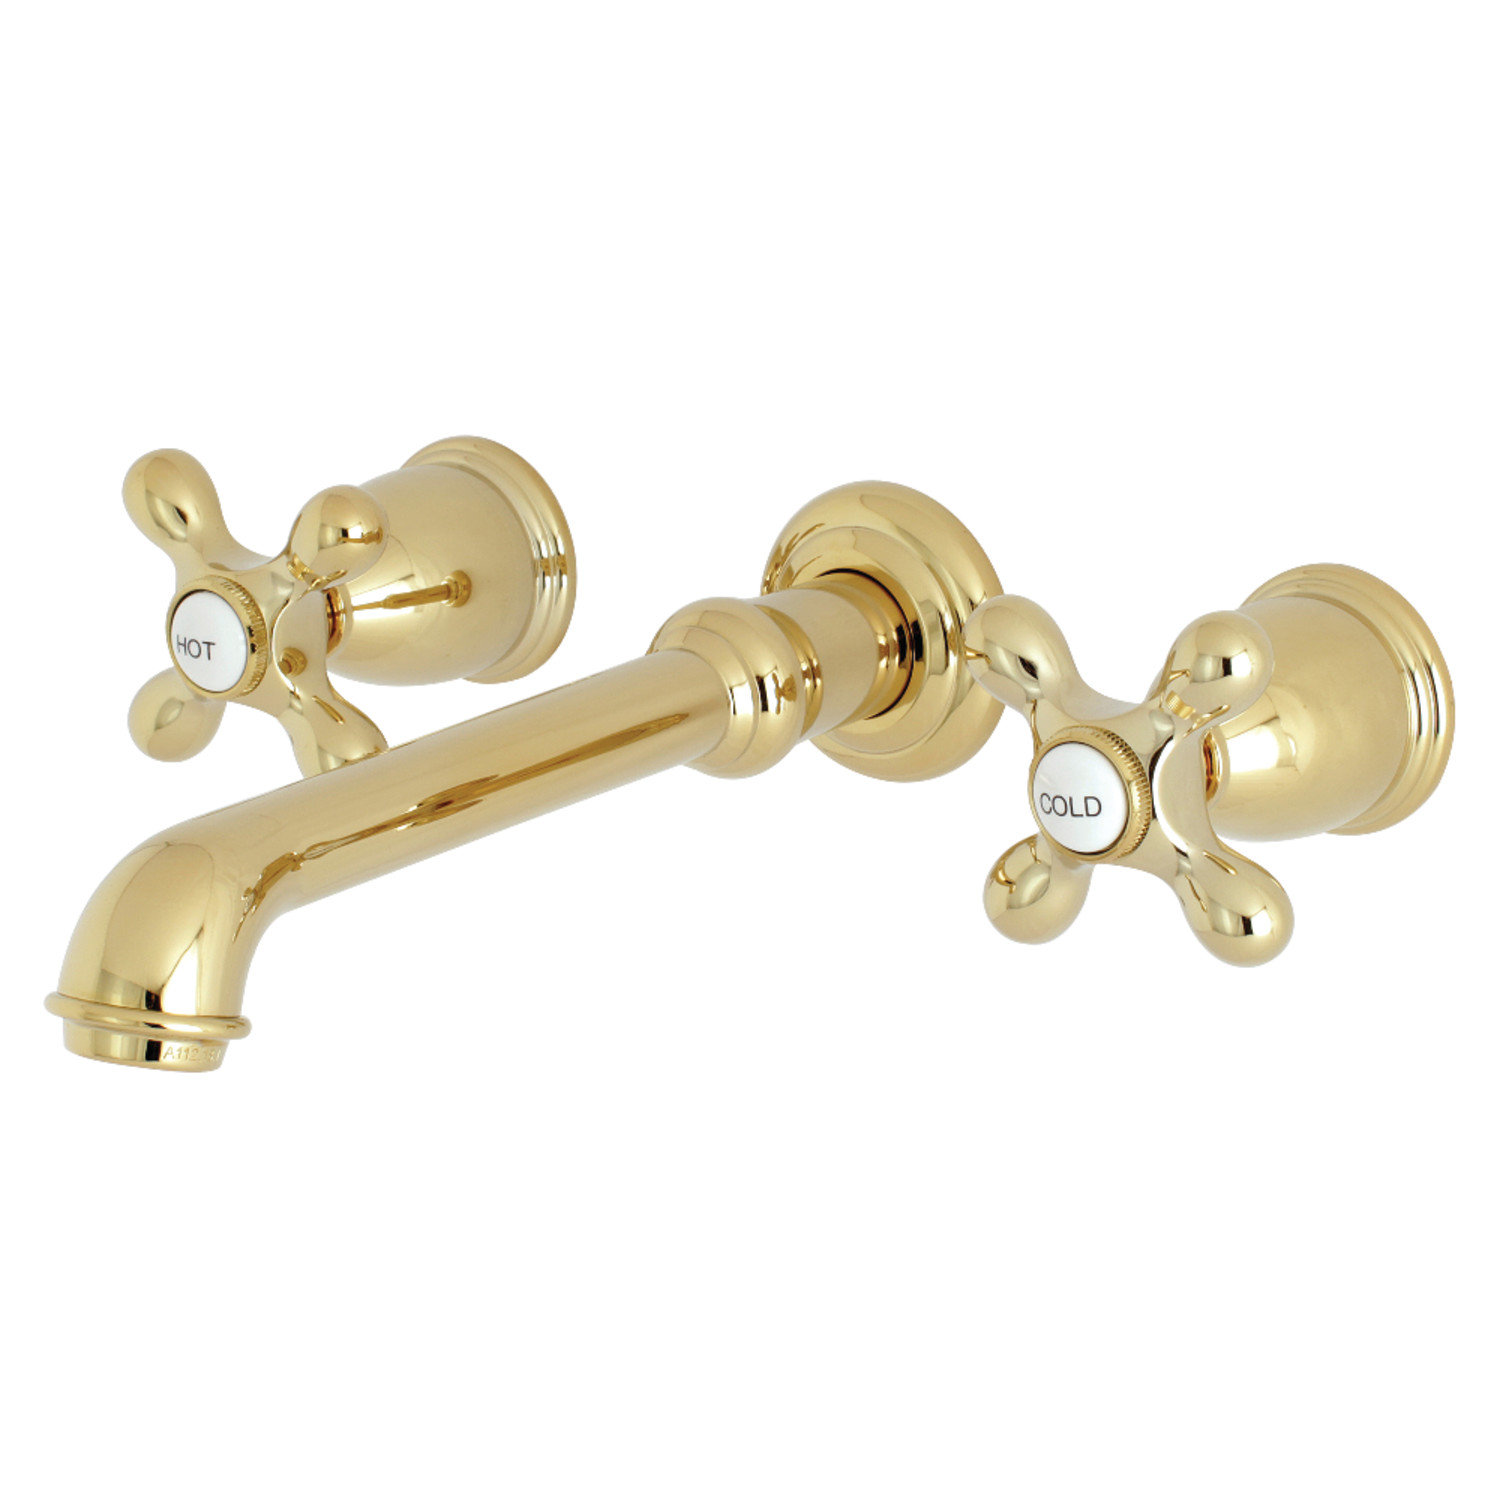 French Country Wall Mounted Bathroom Faucet